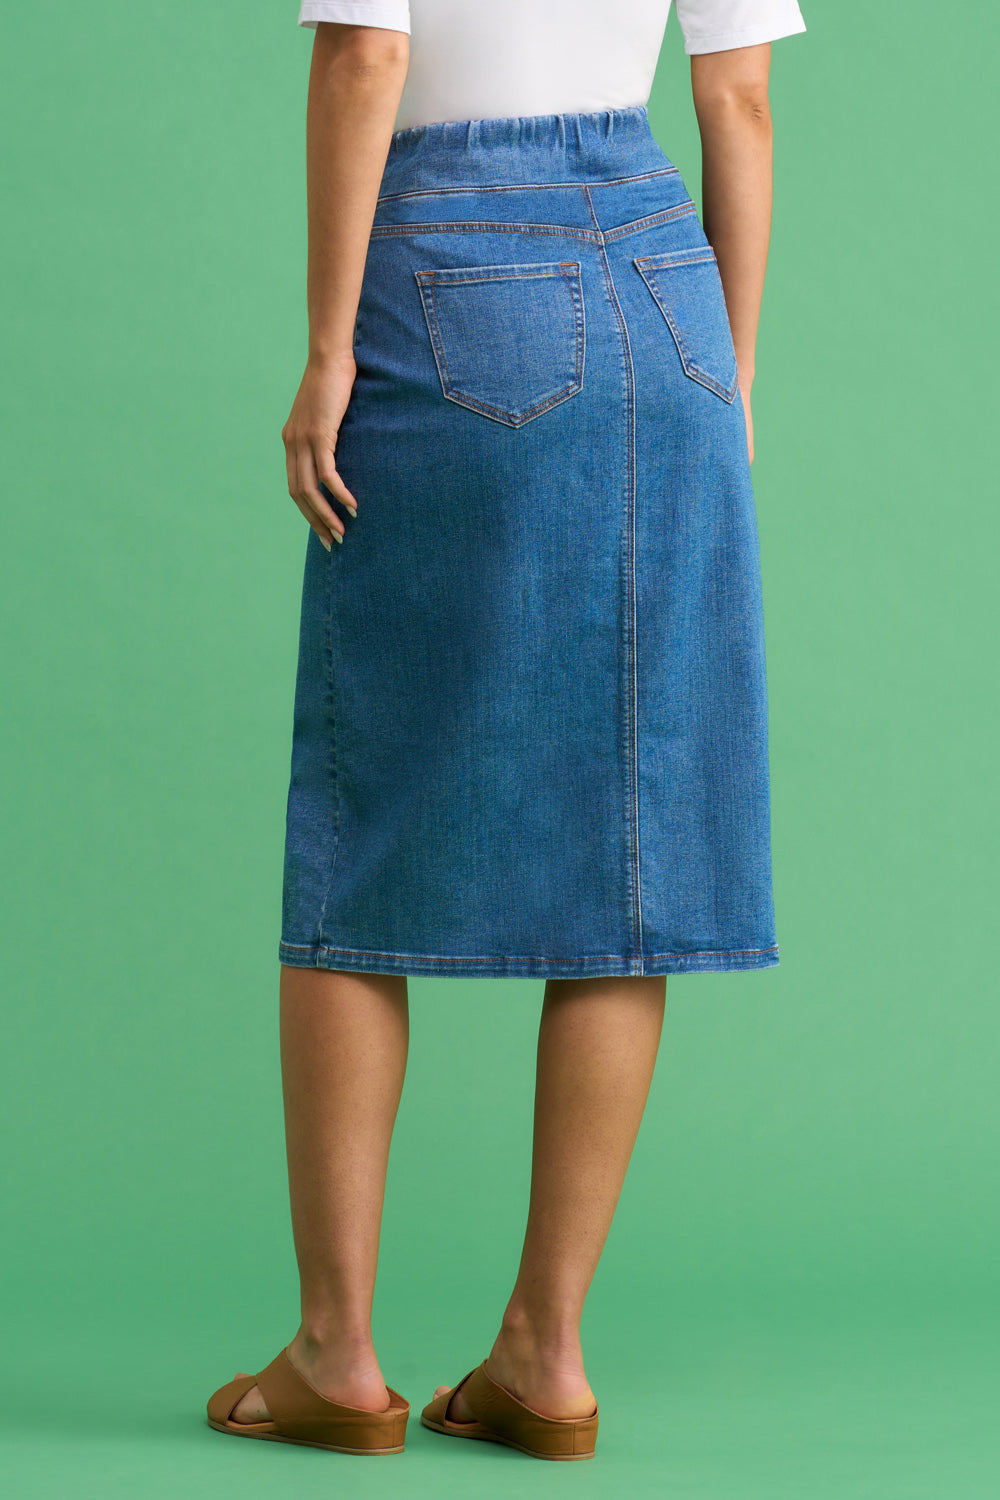 PRUDENCE DENIM SKIRT in BLUE – OUTCAST